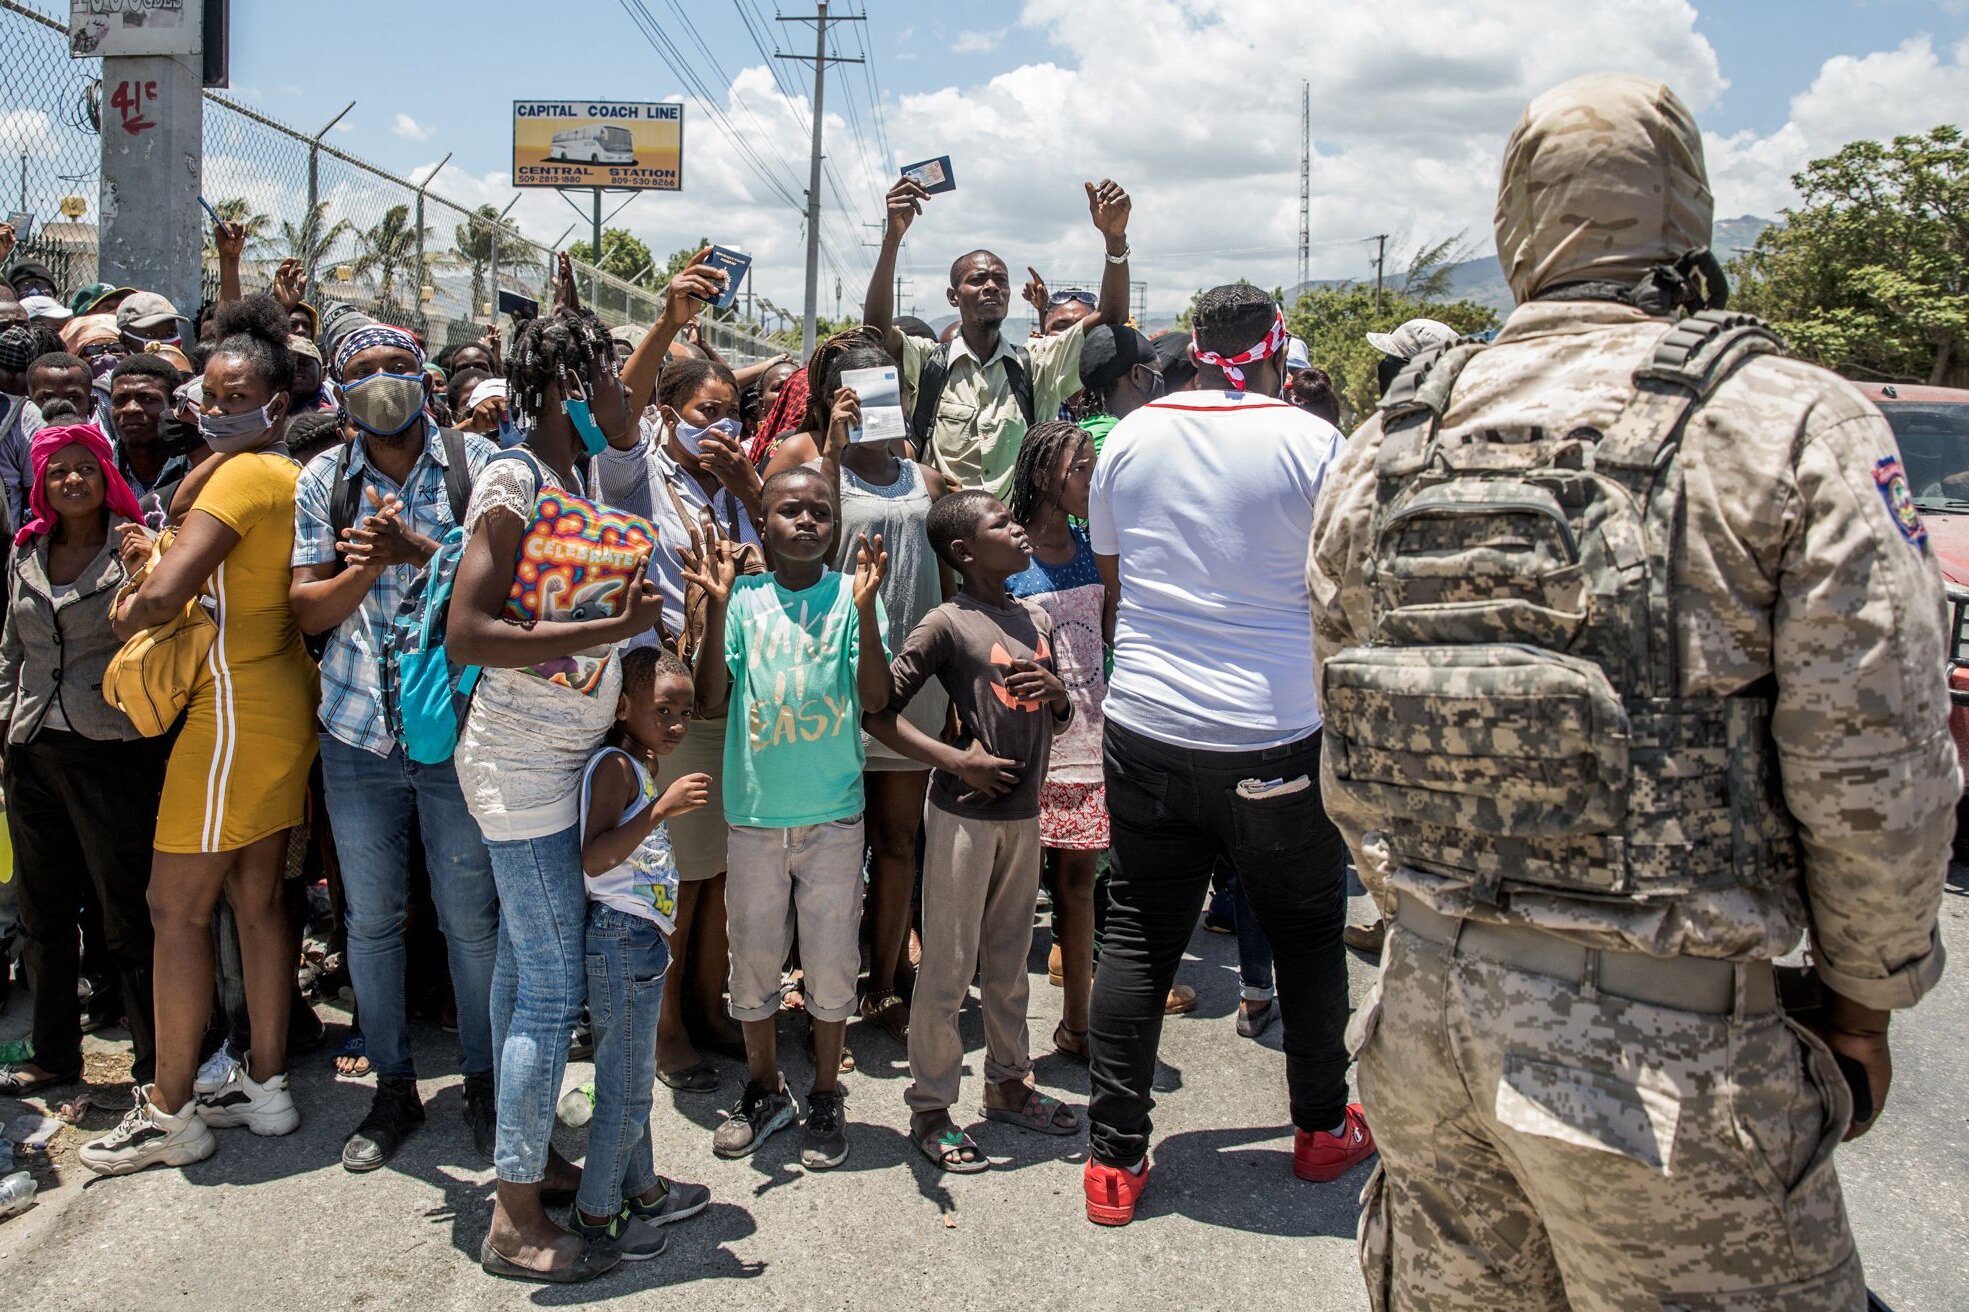 Haitian citizens ask for asylum in front of the U.S. Embassy in Tabarre, Haiti, on Saturday.Credit...Valerie Baeriswyl/Agence France-Presse — Getty Images Michael Crowley